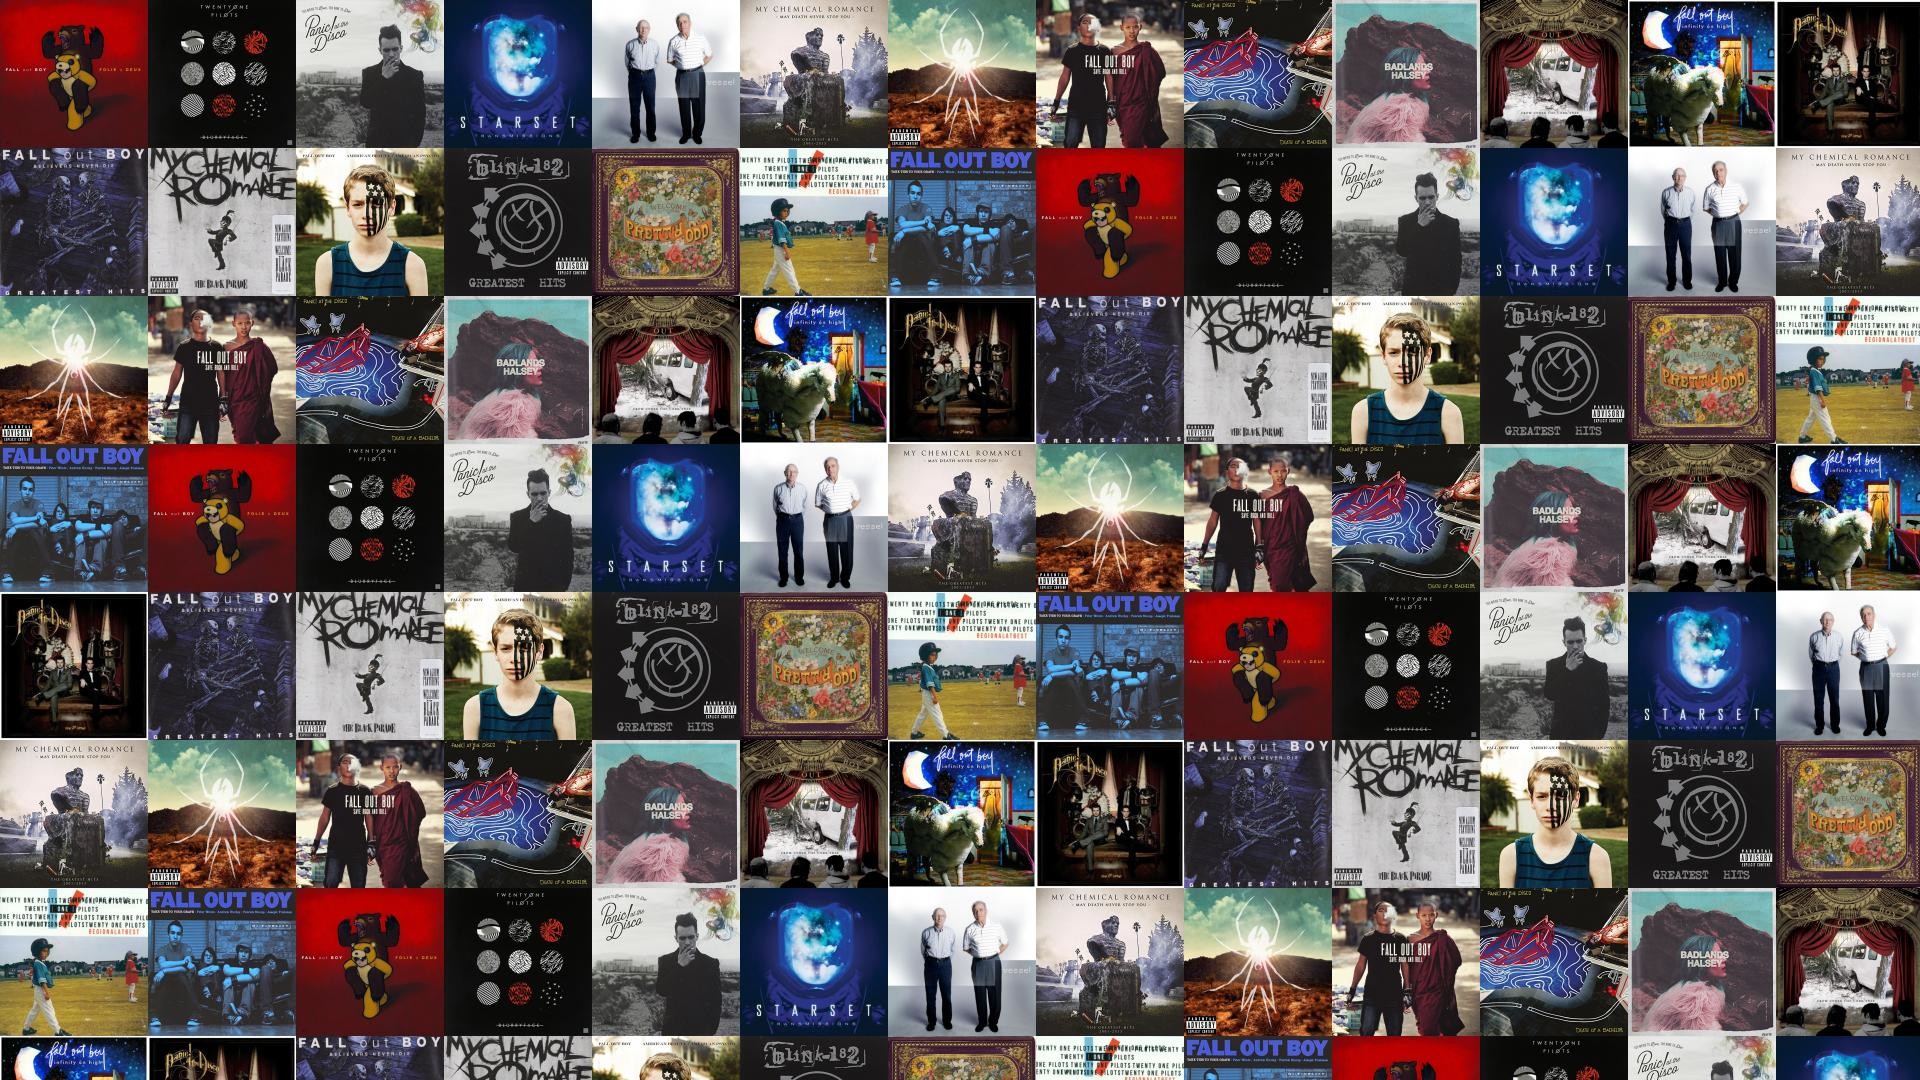 Panic at the Disco Wallpapers (74+ images)1920 x 1080